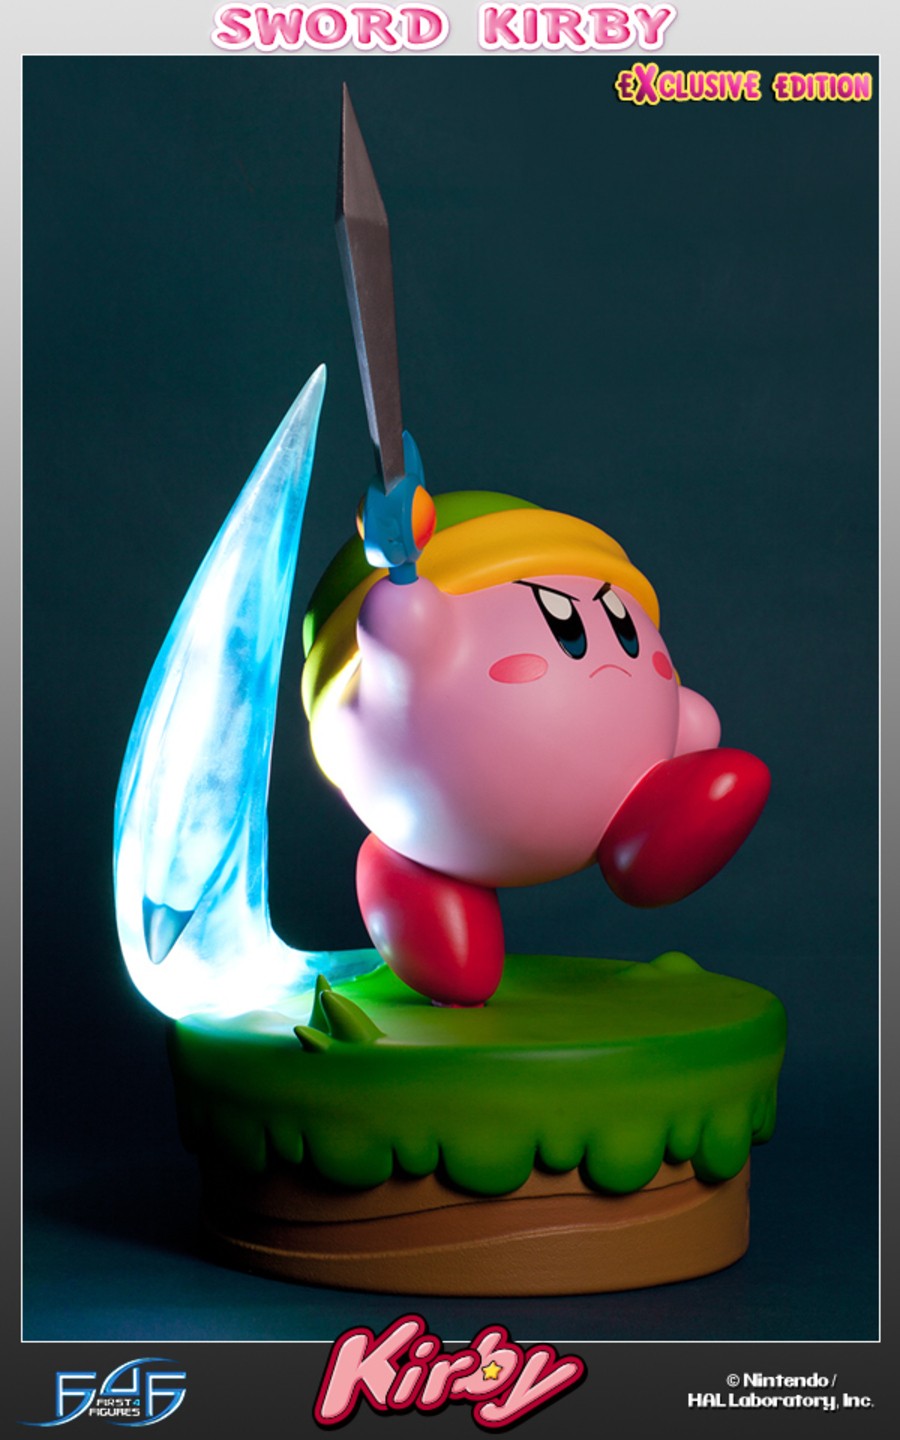 The First 4 Figures Sword Kirby is Cute But Costly | Nintendo Life